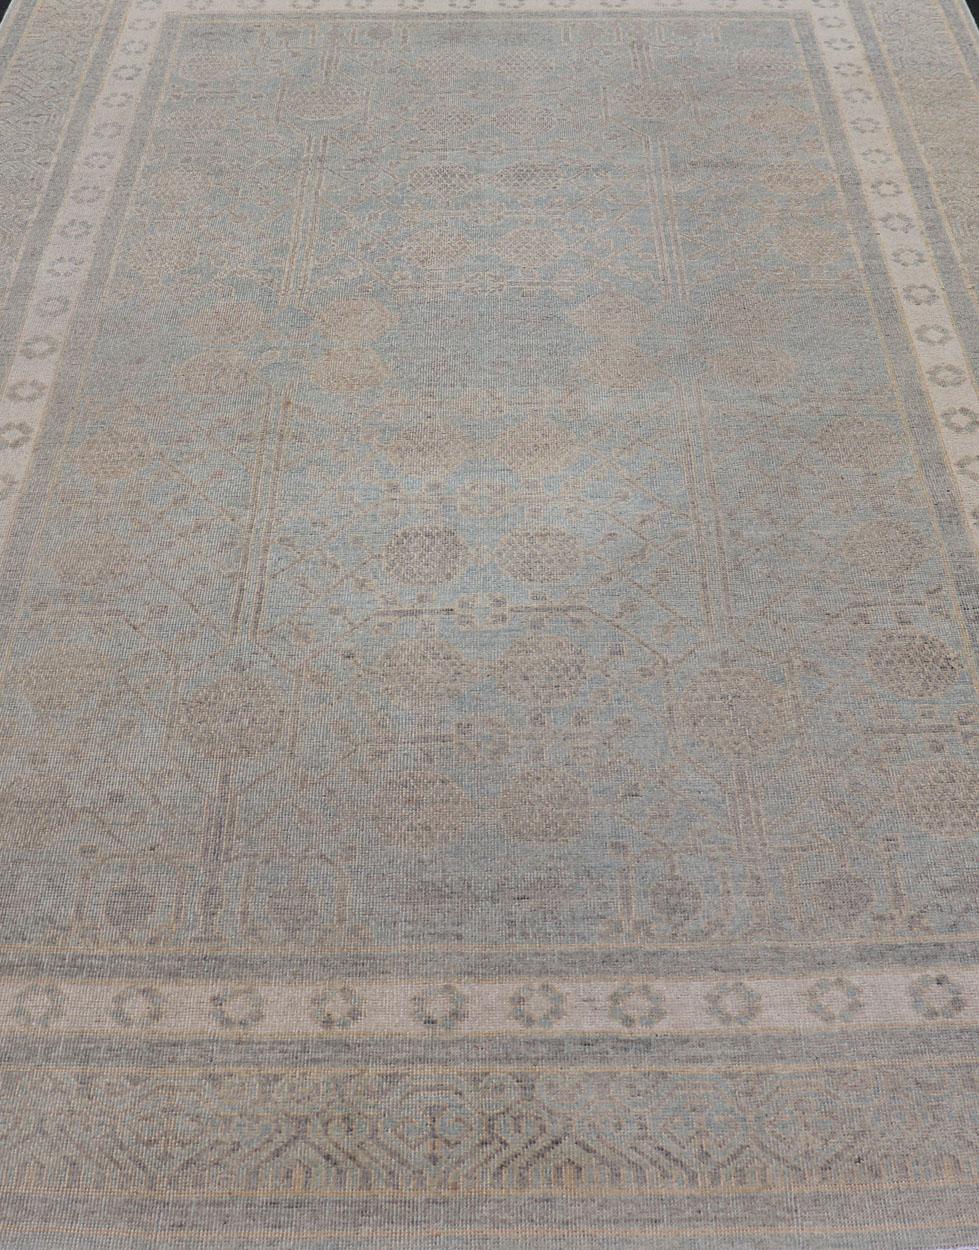 Afghan Khotan Rug with Geometric Design in Shades of Light Blue and Taupe For Sale 3